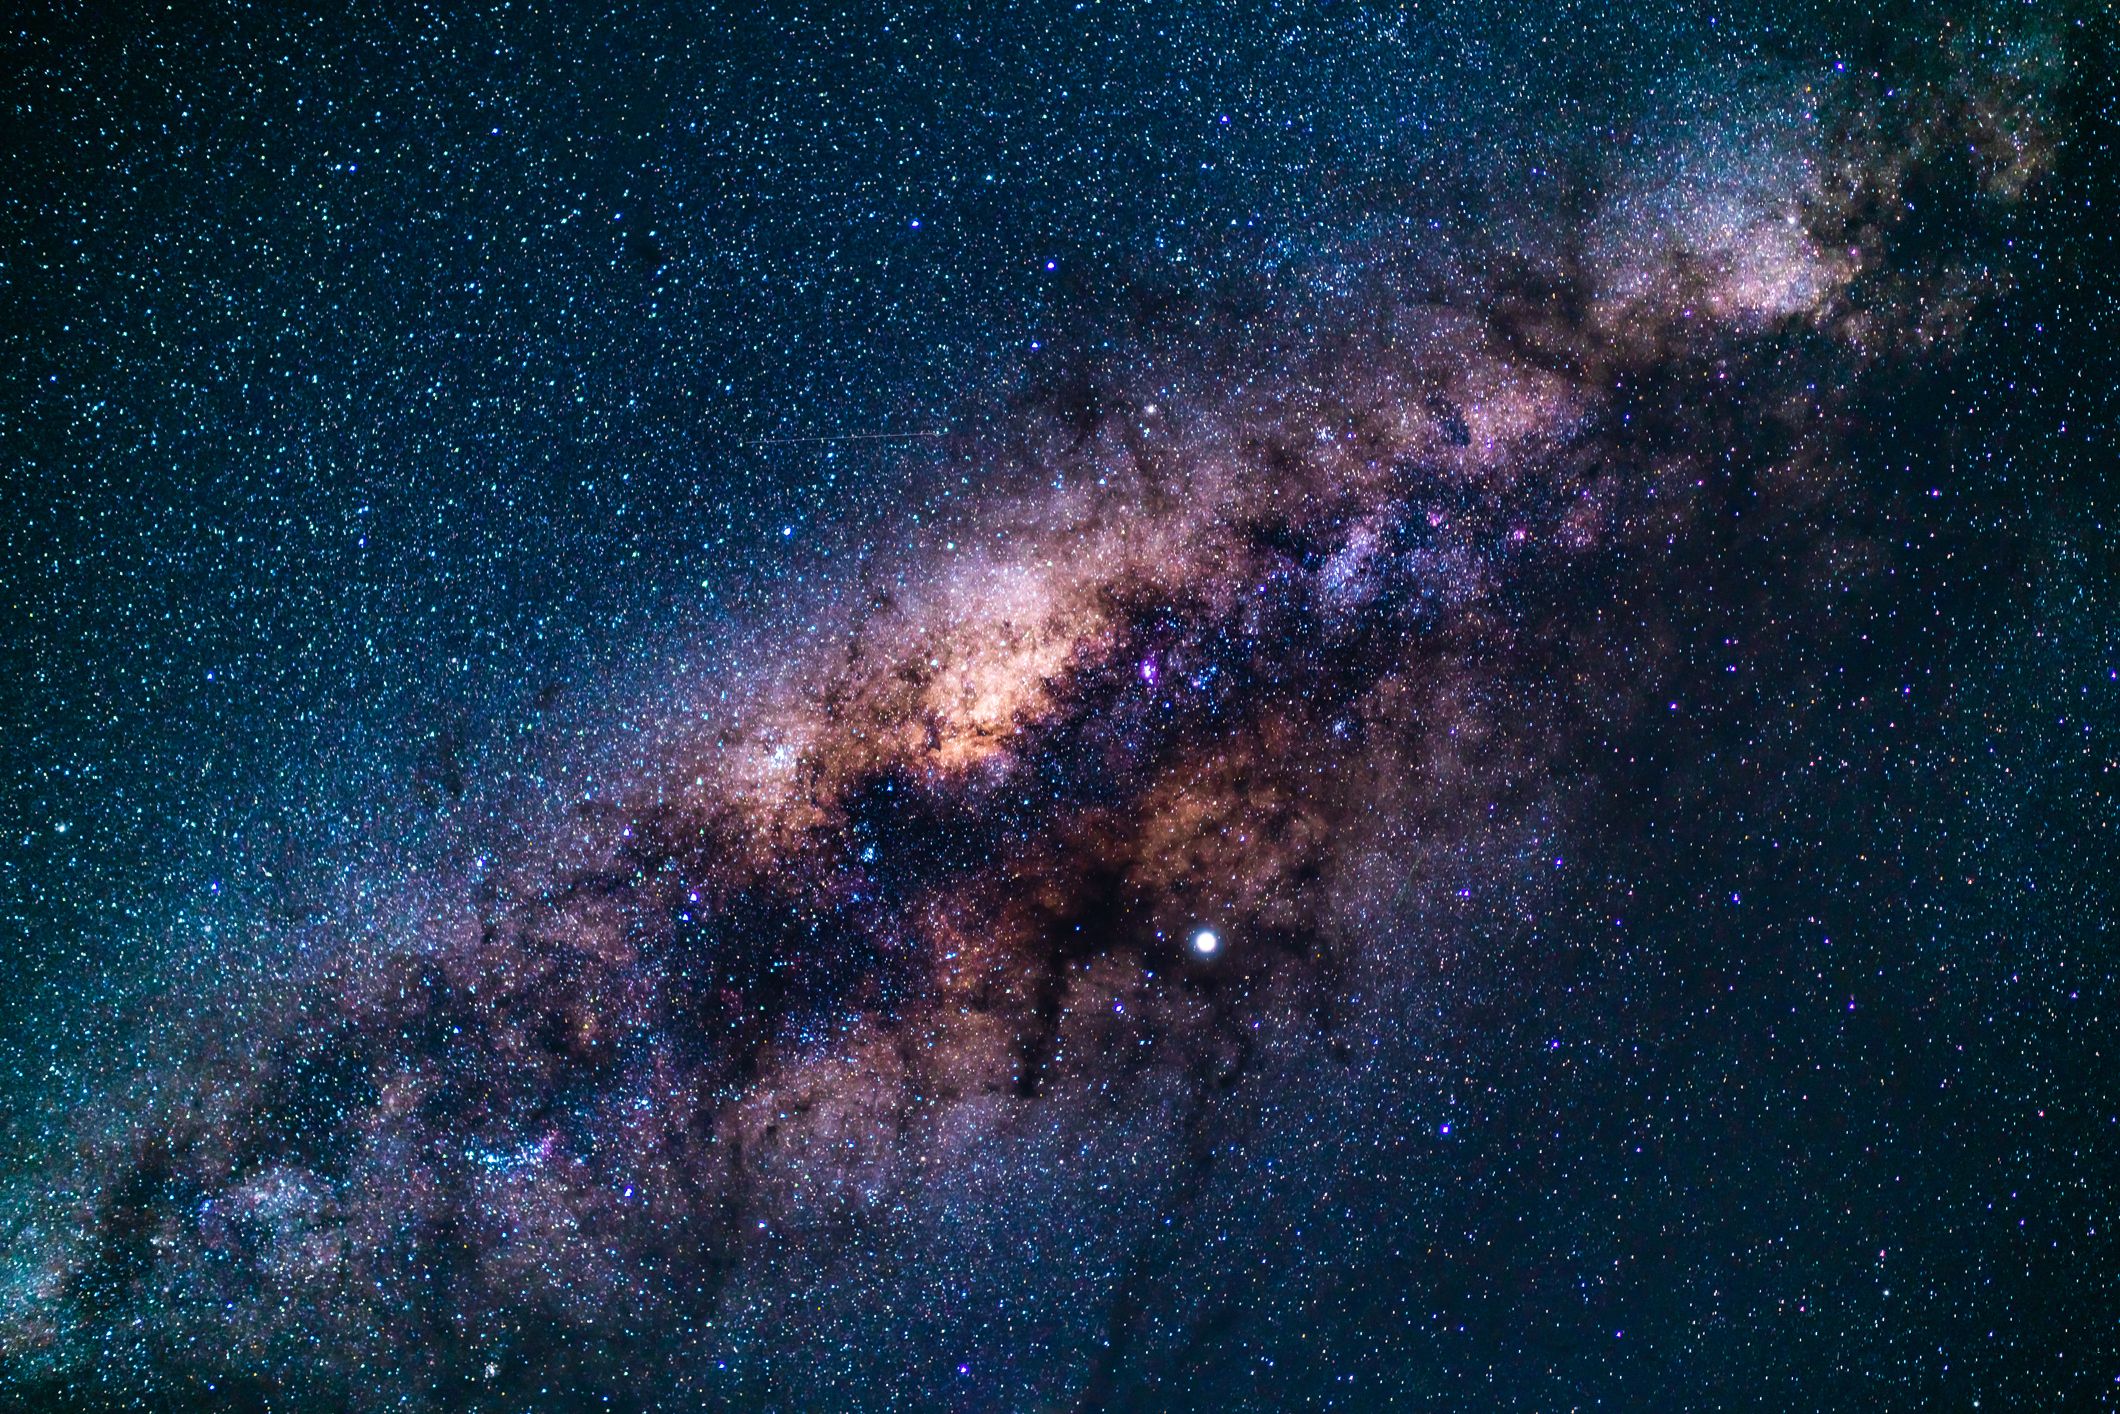 A view of the night sky